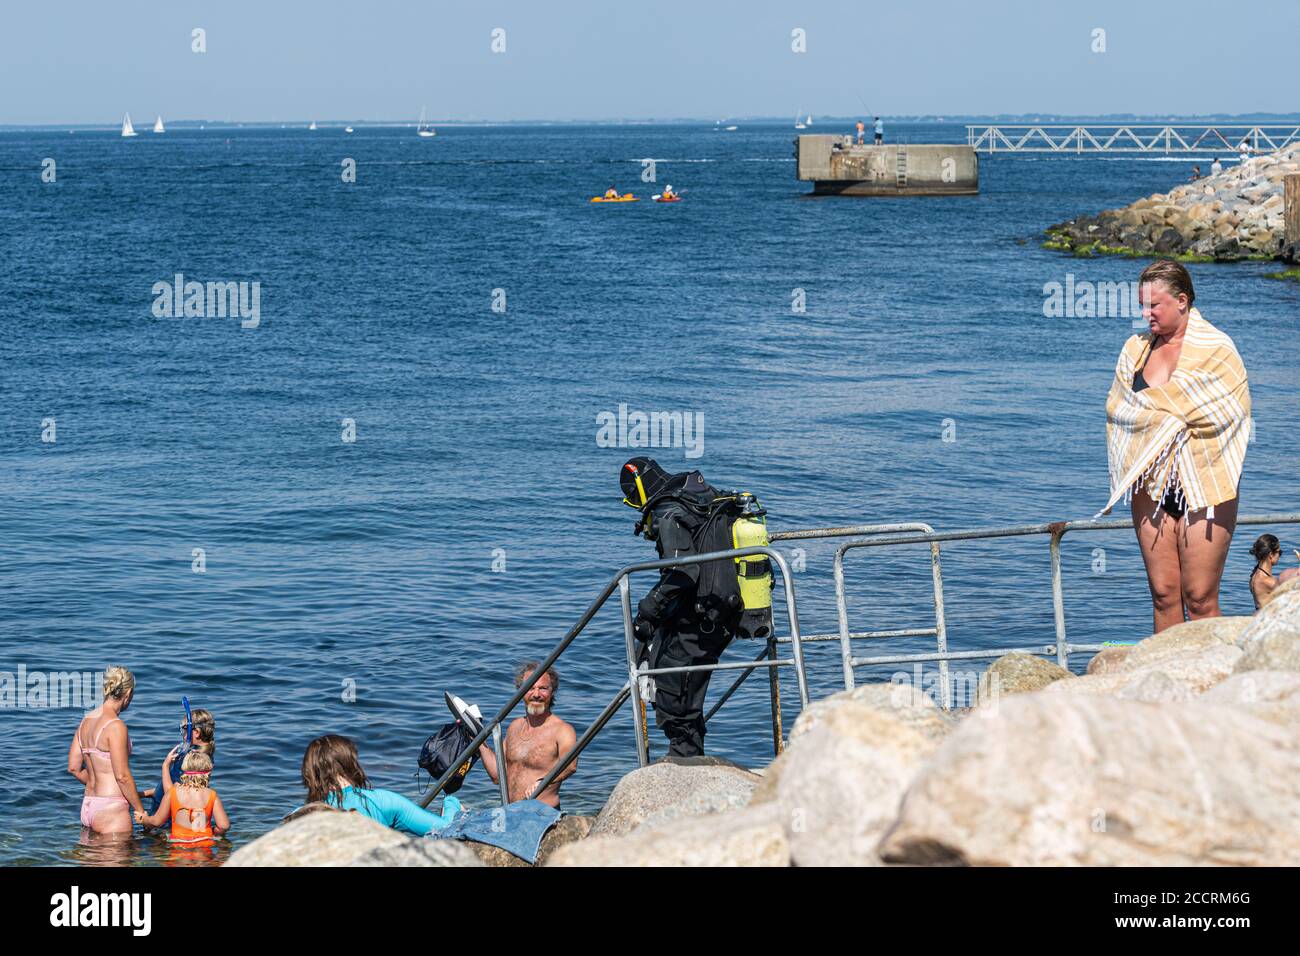 Malmo, Sweden - August 16, 2020: The Island, On in Swedish, is a very popular spot for scuba diving in Malmo Stock Photo